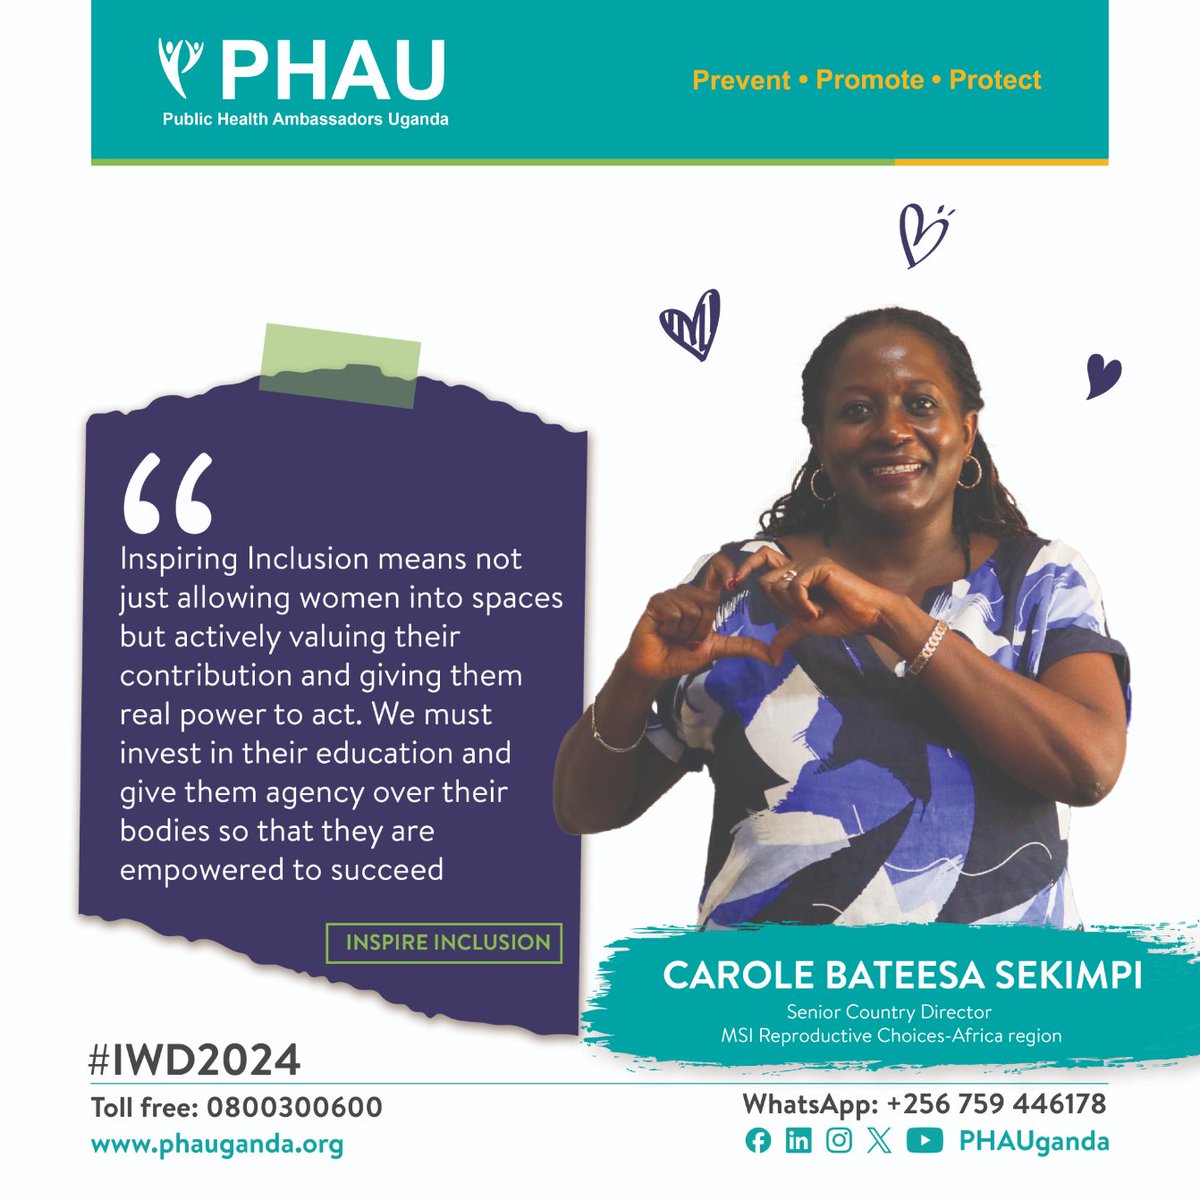 As we crown off Women's Month, our Board Chair @CSekimpi shares a powerful message of empowerment and inspiring inclusion. Let's carry the spirit of equality and empowerment forward every day! #PHAUCARES #WomensMonth #IWD2024 #InspireInclusion